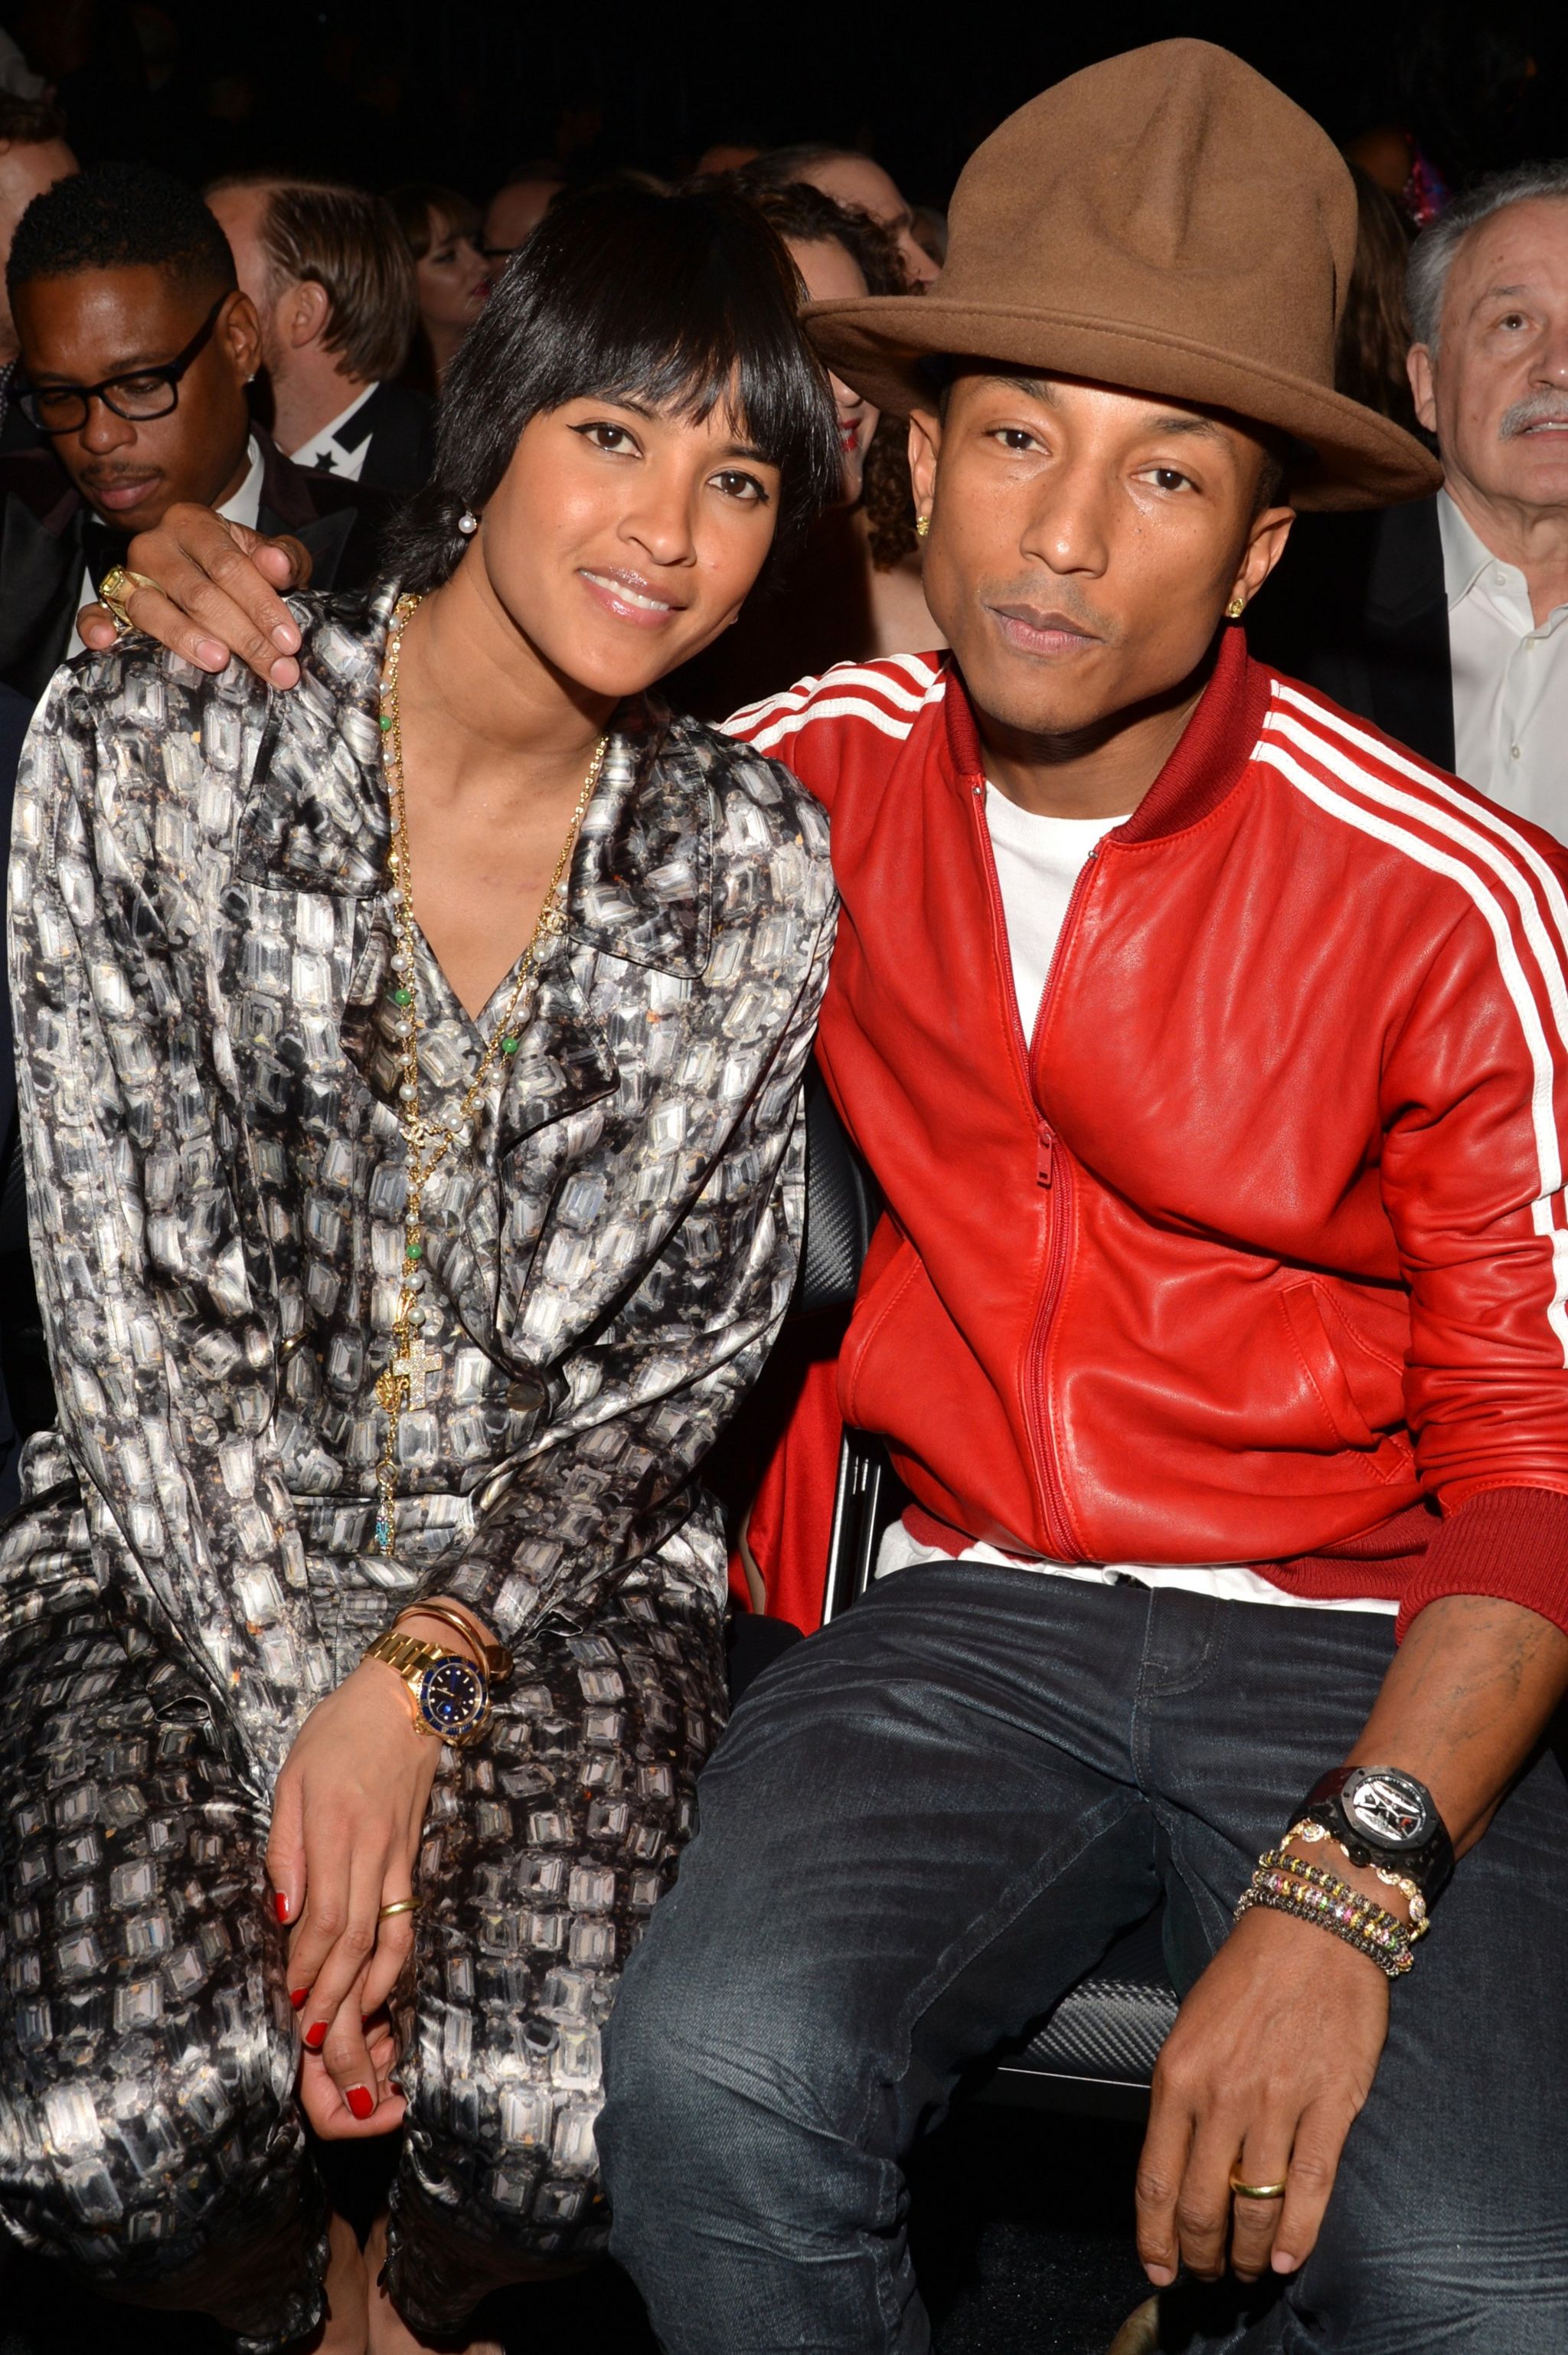 Helen Lasichanh (left) and Pharrell Williams attend the 56th GRAMMY Awards at Staples Center, 26 January 2014 in Los Angeles, California